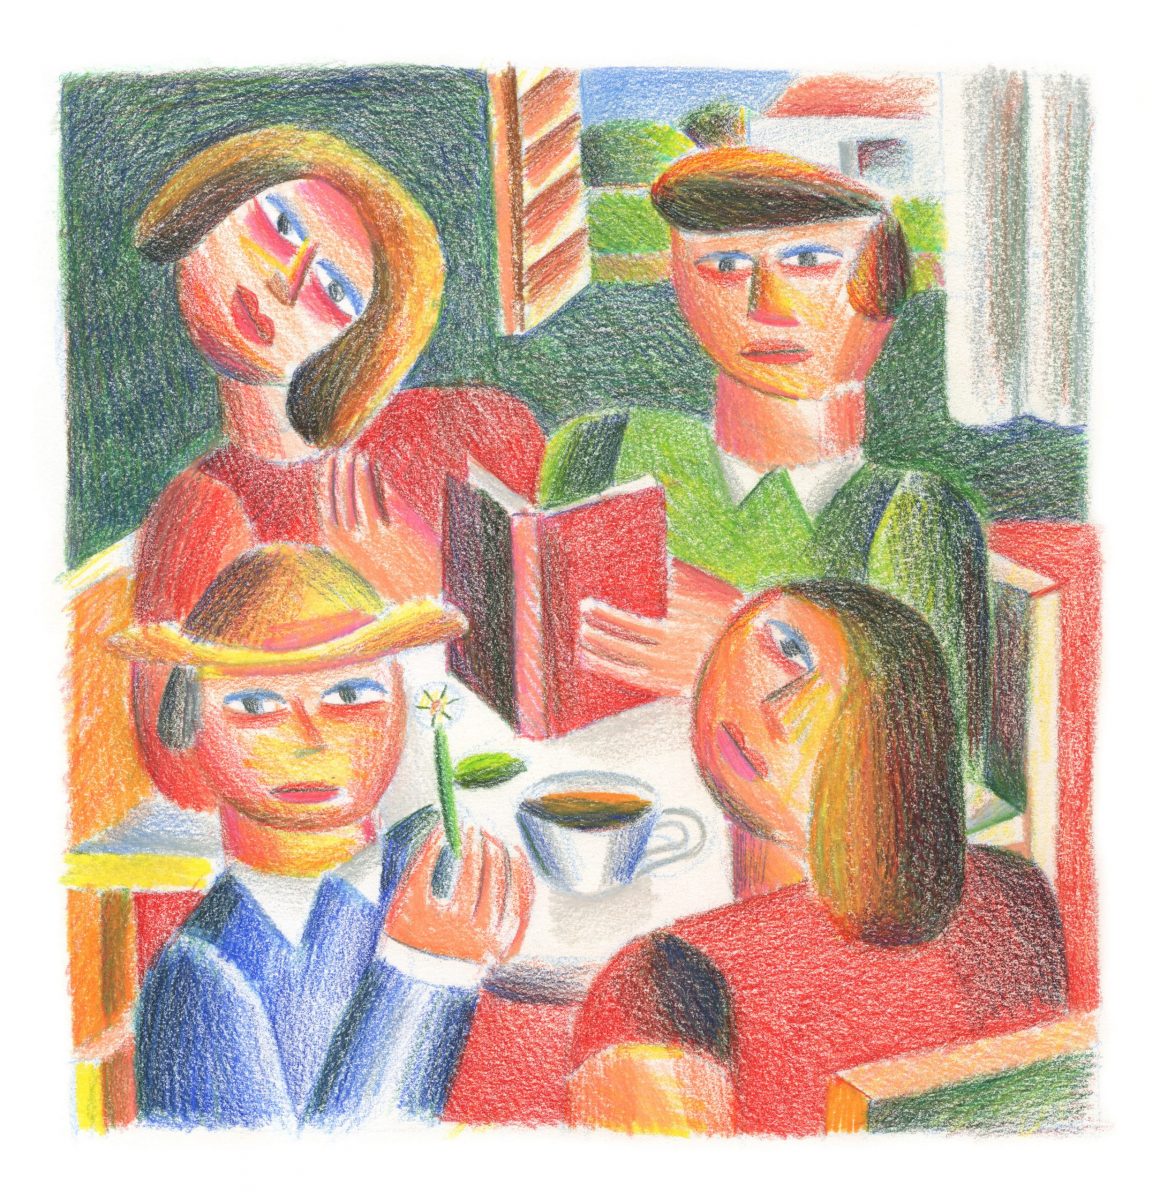 Andy Rementer, Book Club, 2020, colored pencil on paper, 30,5×22,9 cm, CROP